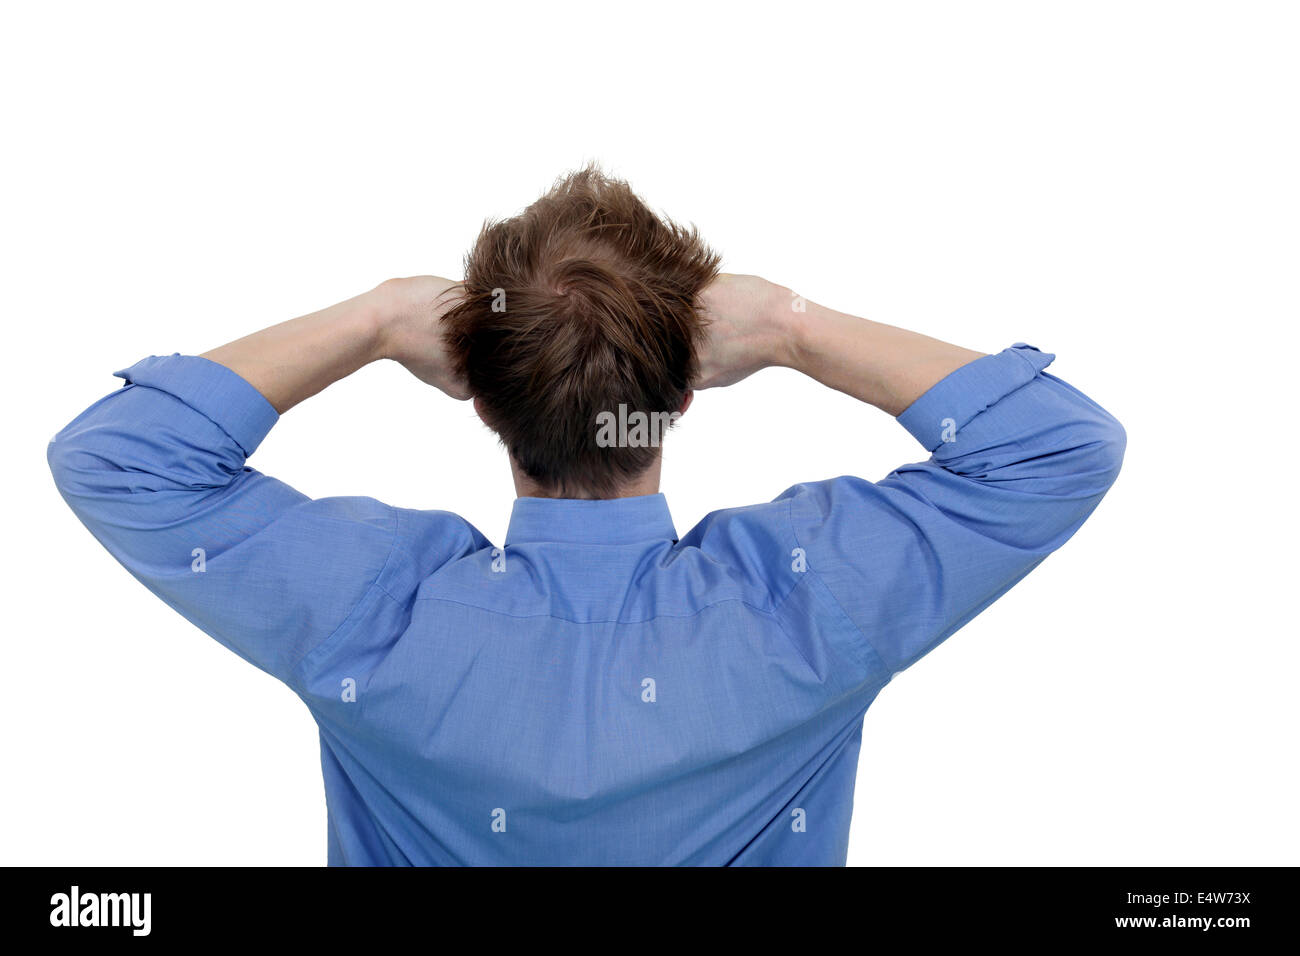 man standing backward and stretching Stock Photo